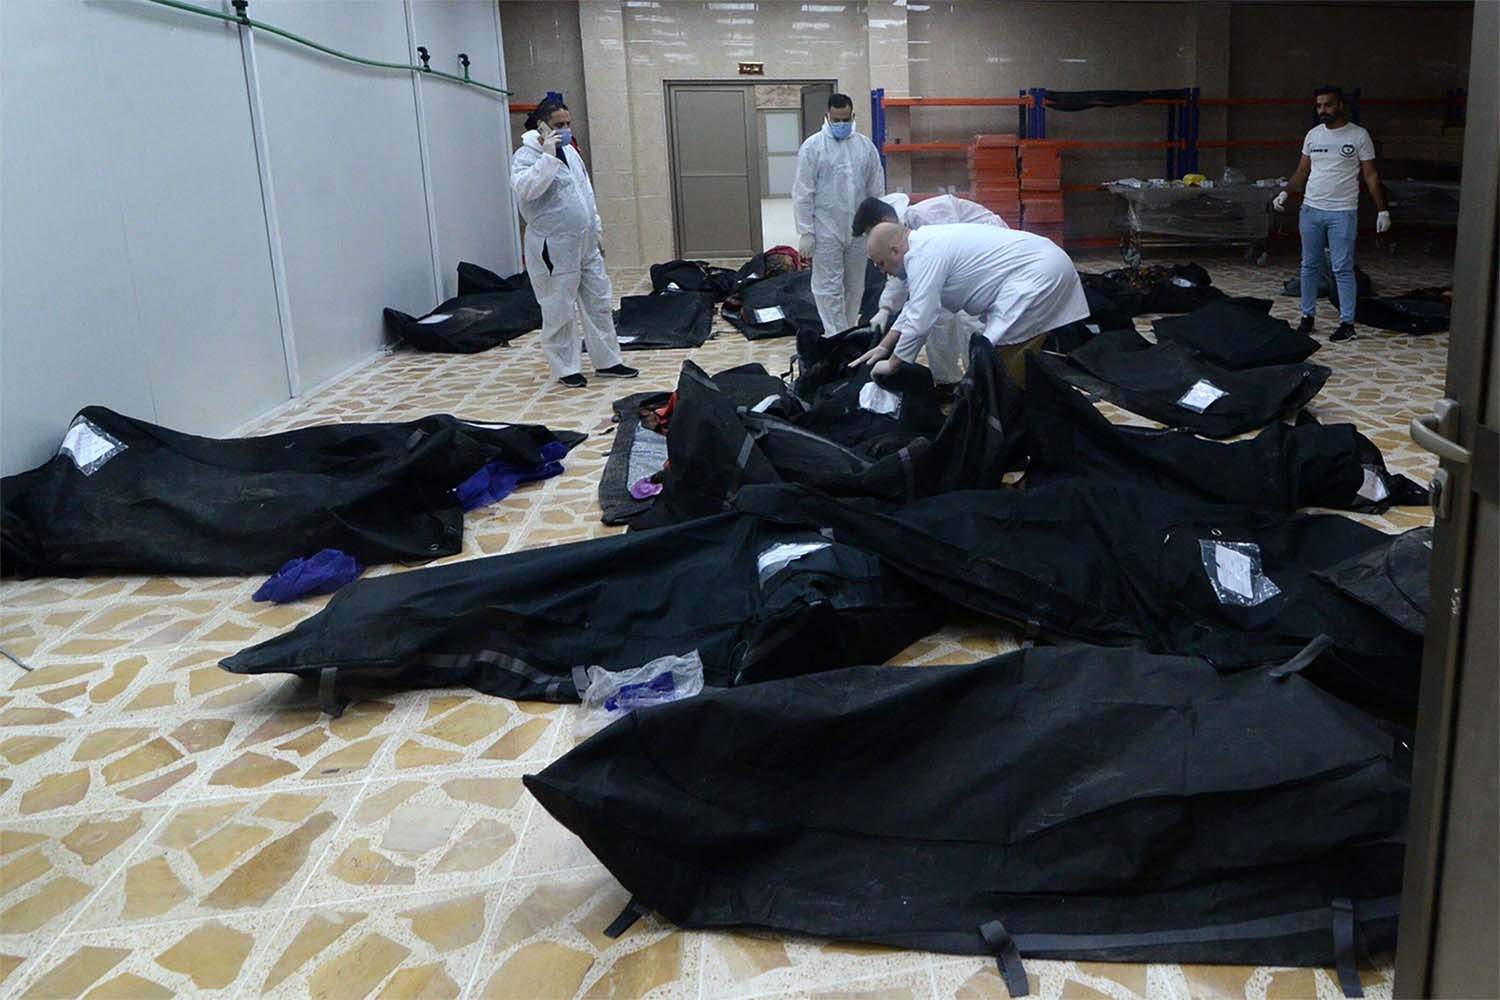 Bodies of people killed in a fire during a wedding in an event hall in Qaraqosh